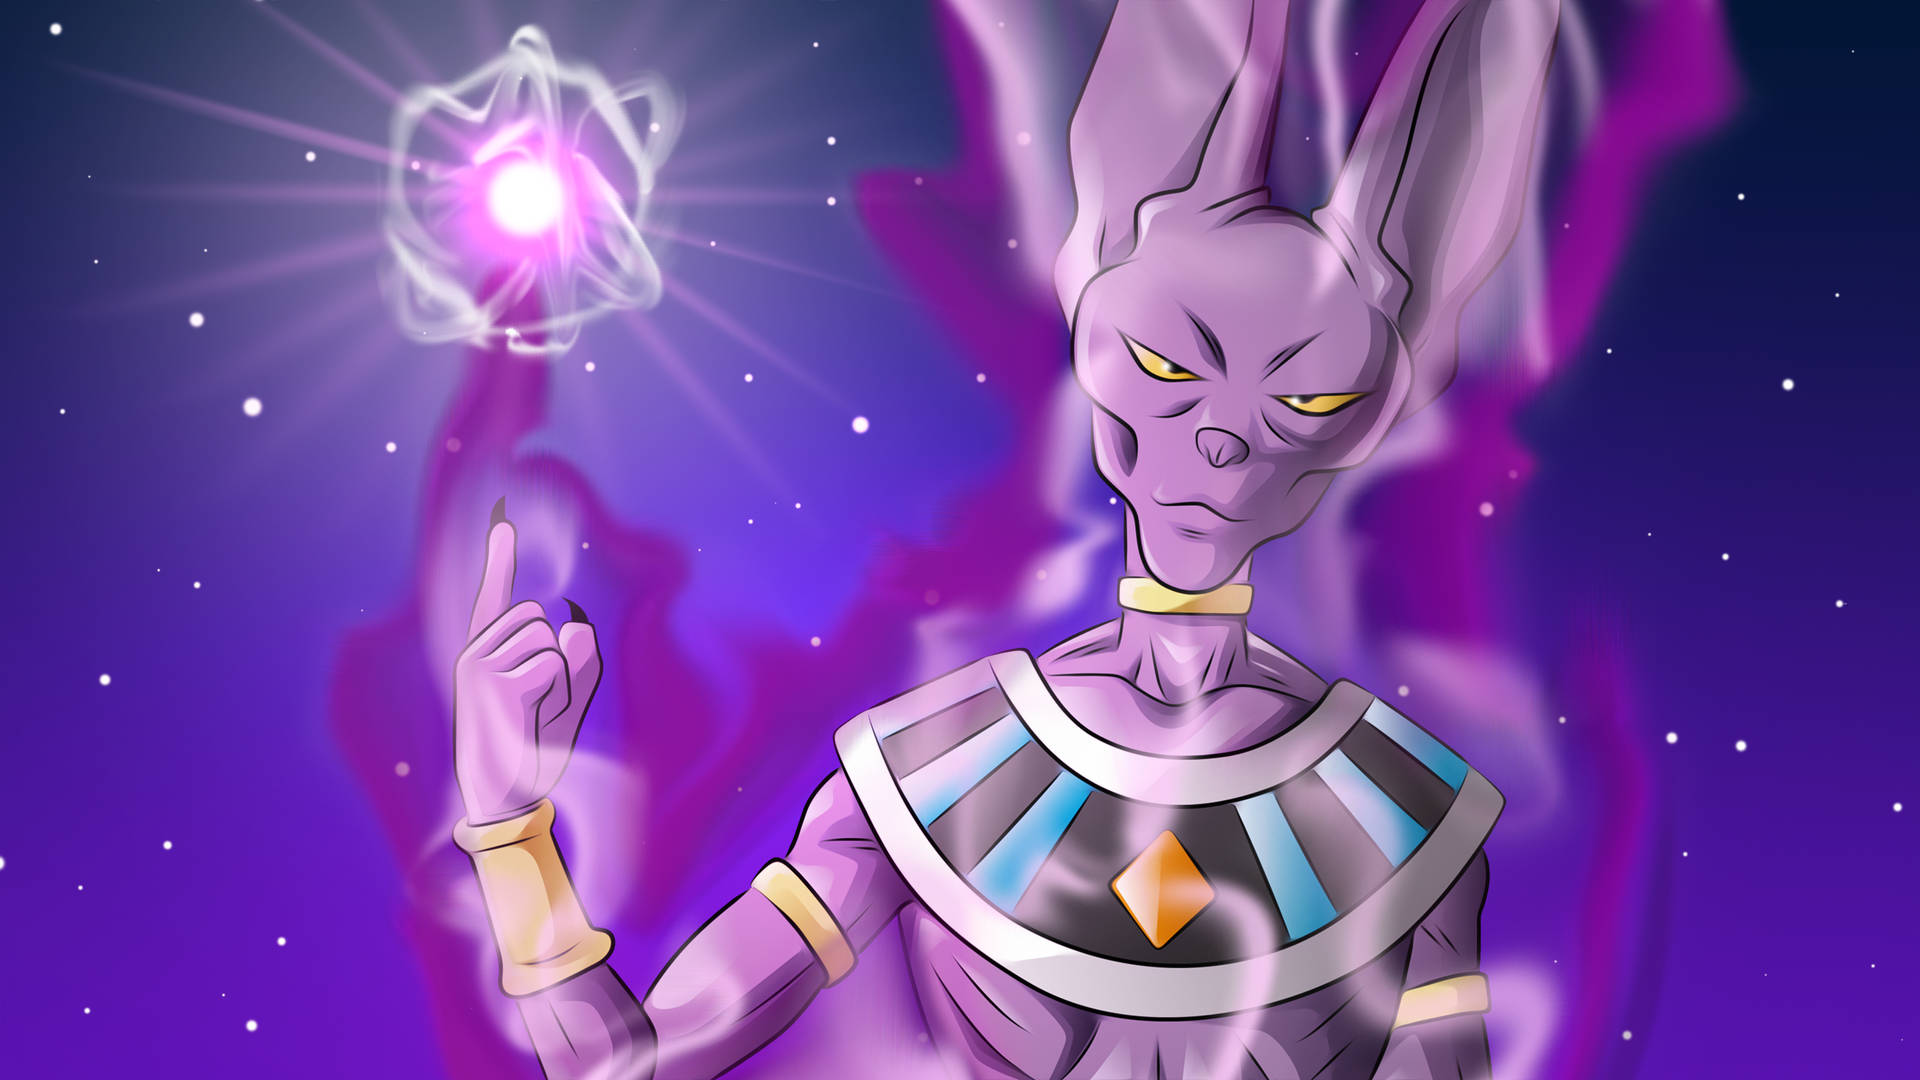 Top 999+ Beerus Wallpapers Full HD, 4K✅Free to Use